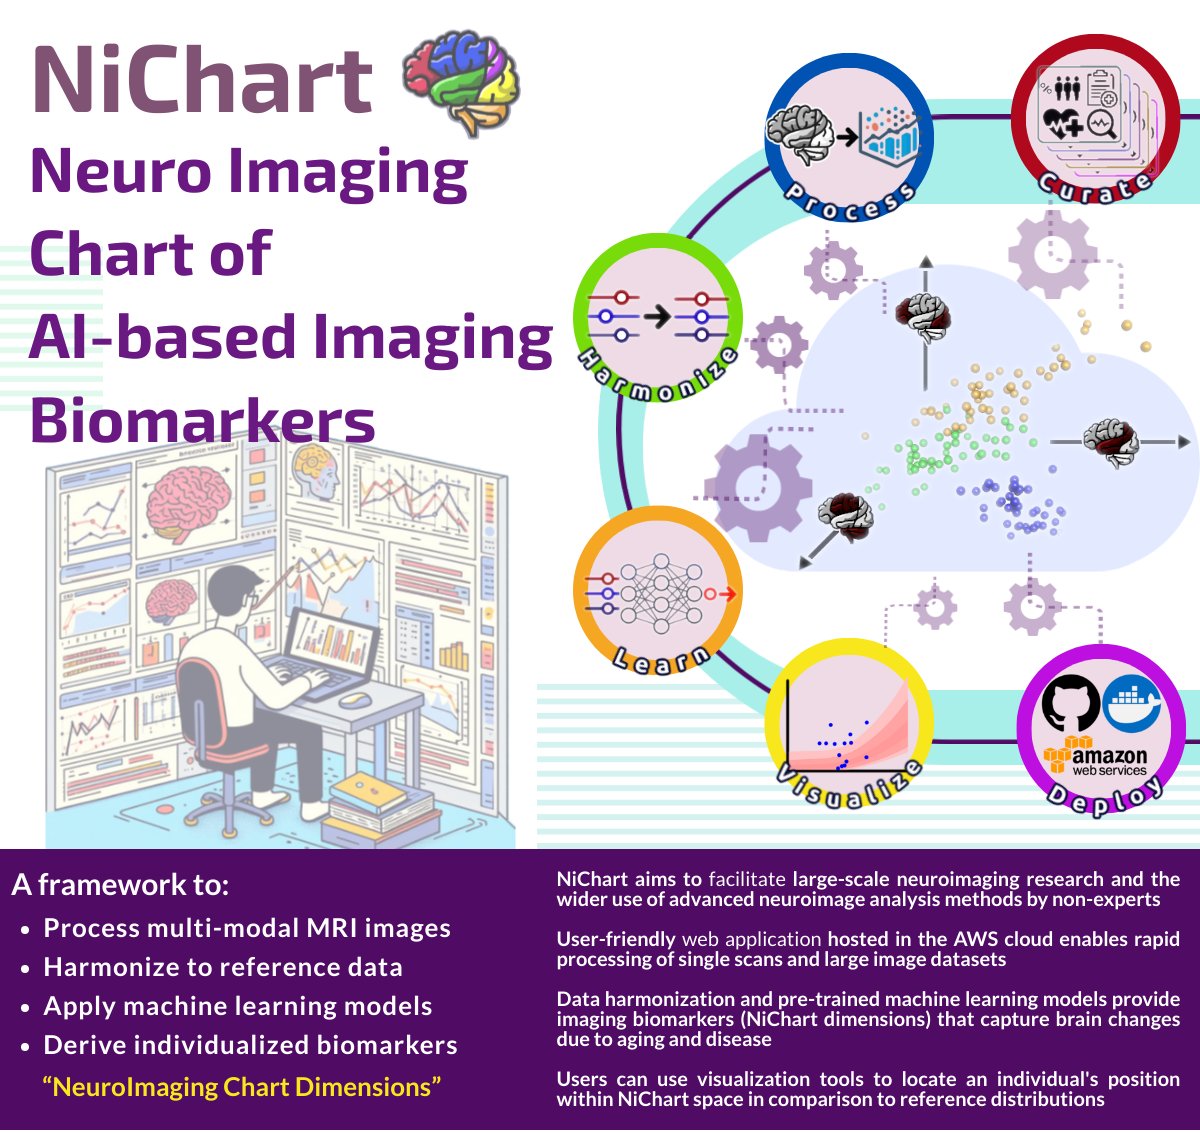 Introducing NiChart v1: a multi-modal MRI brain chart built from over 50,000 individuals that provides imaging signatures of aging, neurodegenerative diseases, and neuropsychiatric disorders. neuroimagingchart.com A 🧵 [1/4]